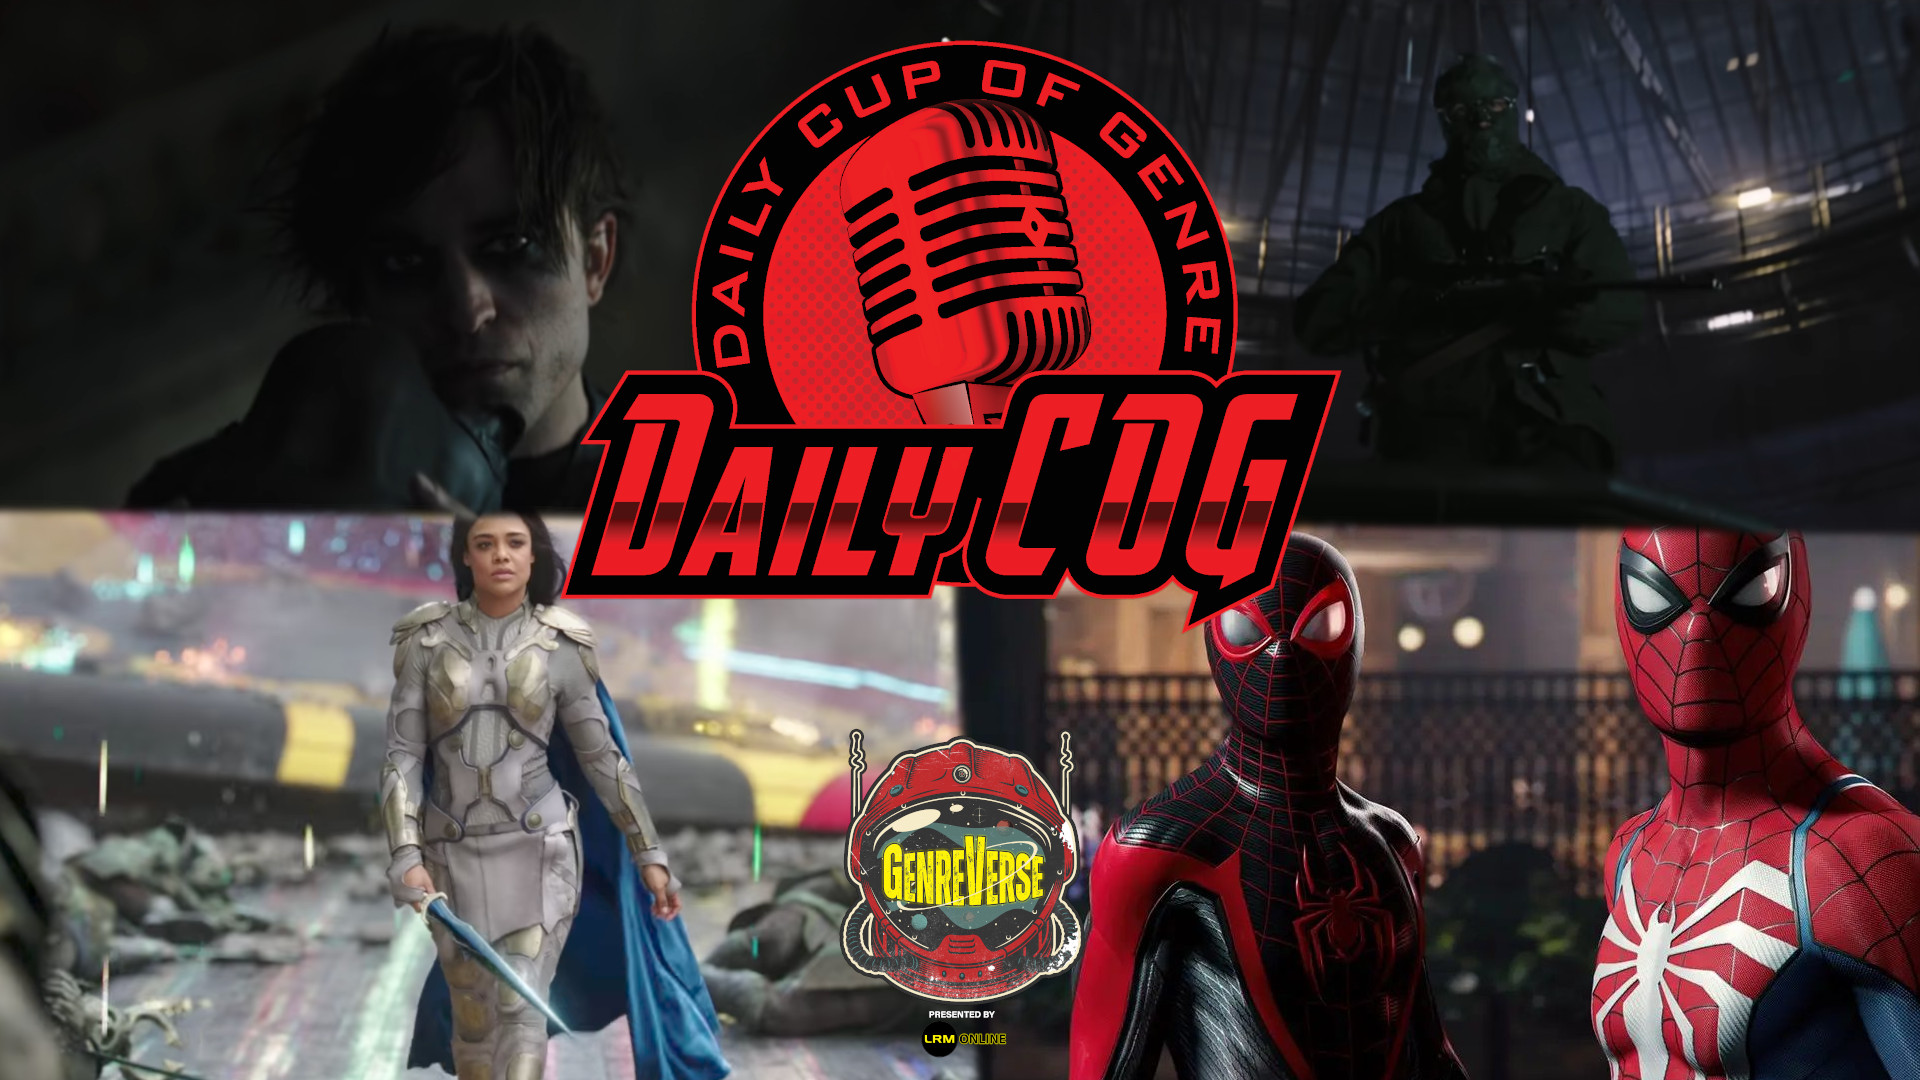 Robert Pattinson On Batman's No-Kill Rule, Miles Morales MCU Spider-Man Rumors, And Romance In Thor Love And Thunder Daily COG Video Mixdown